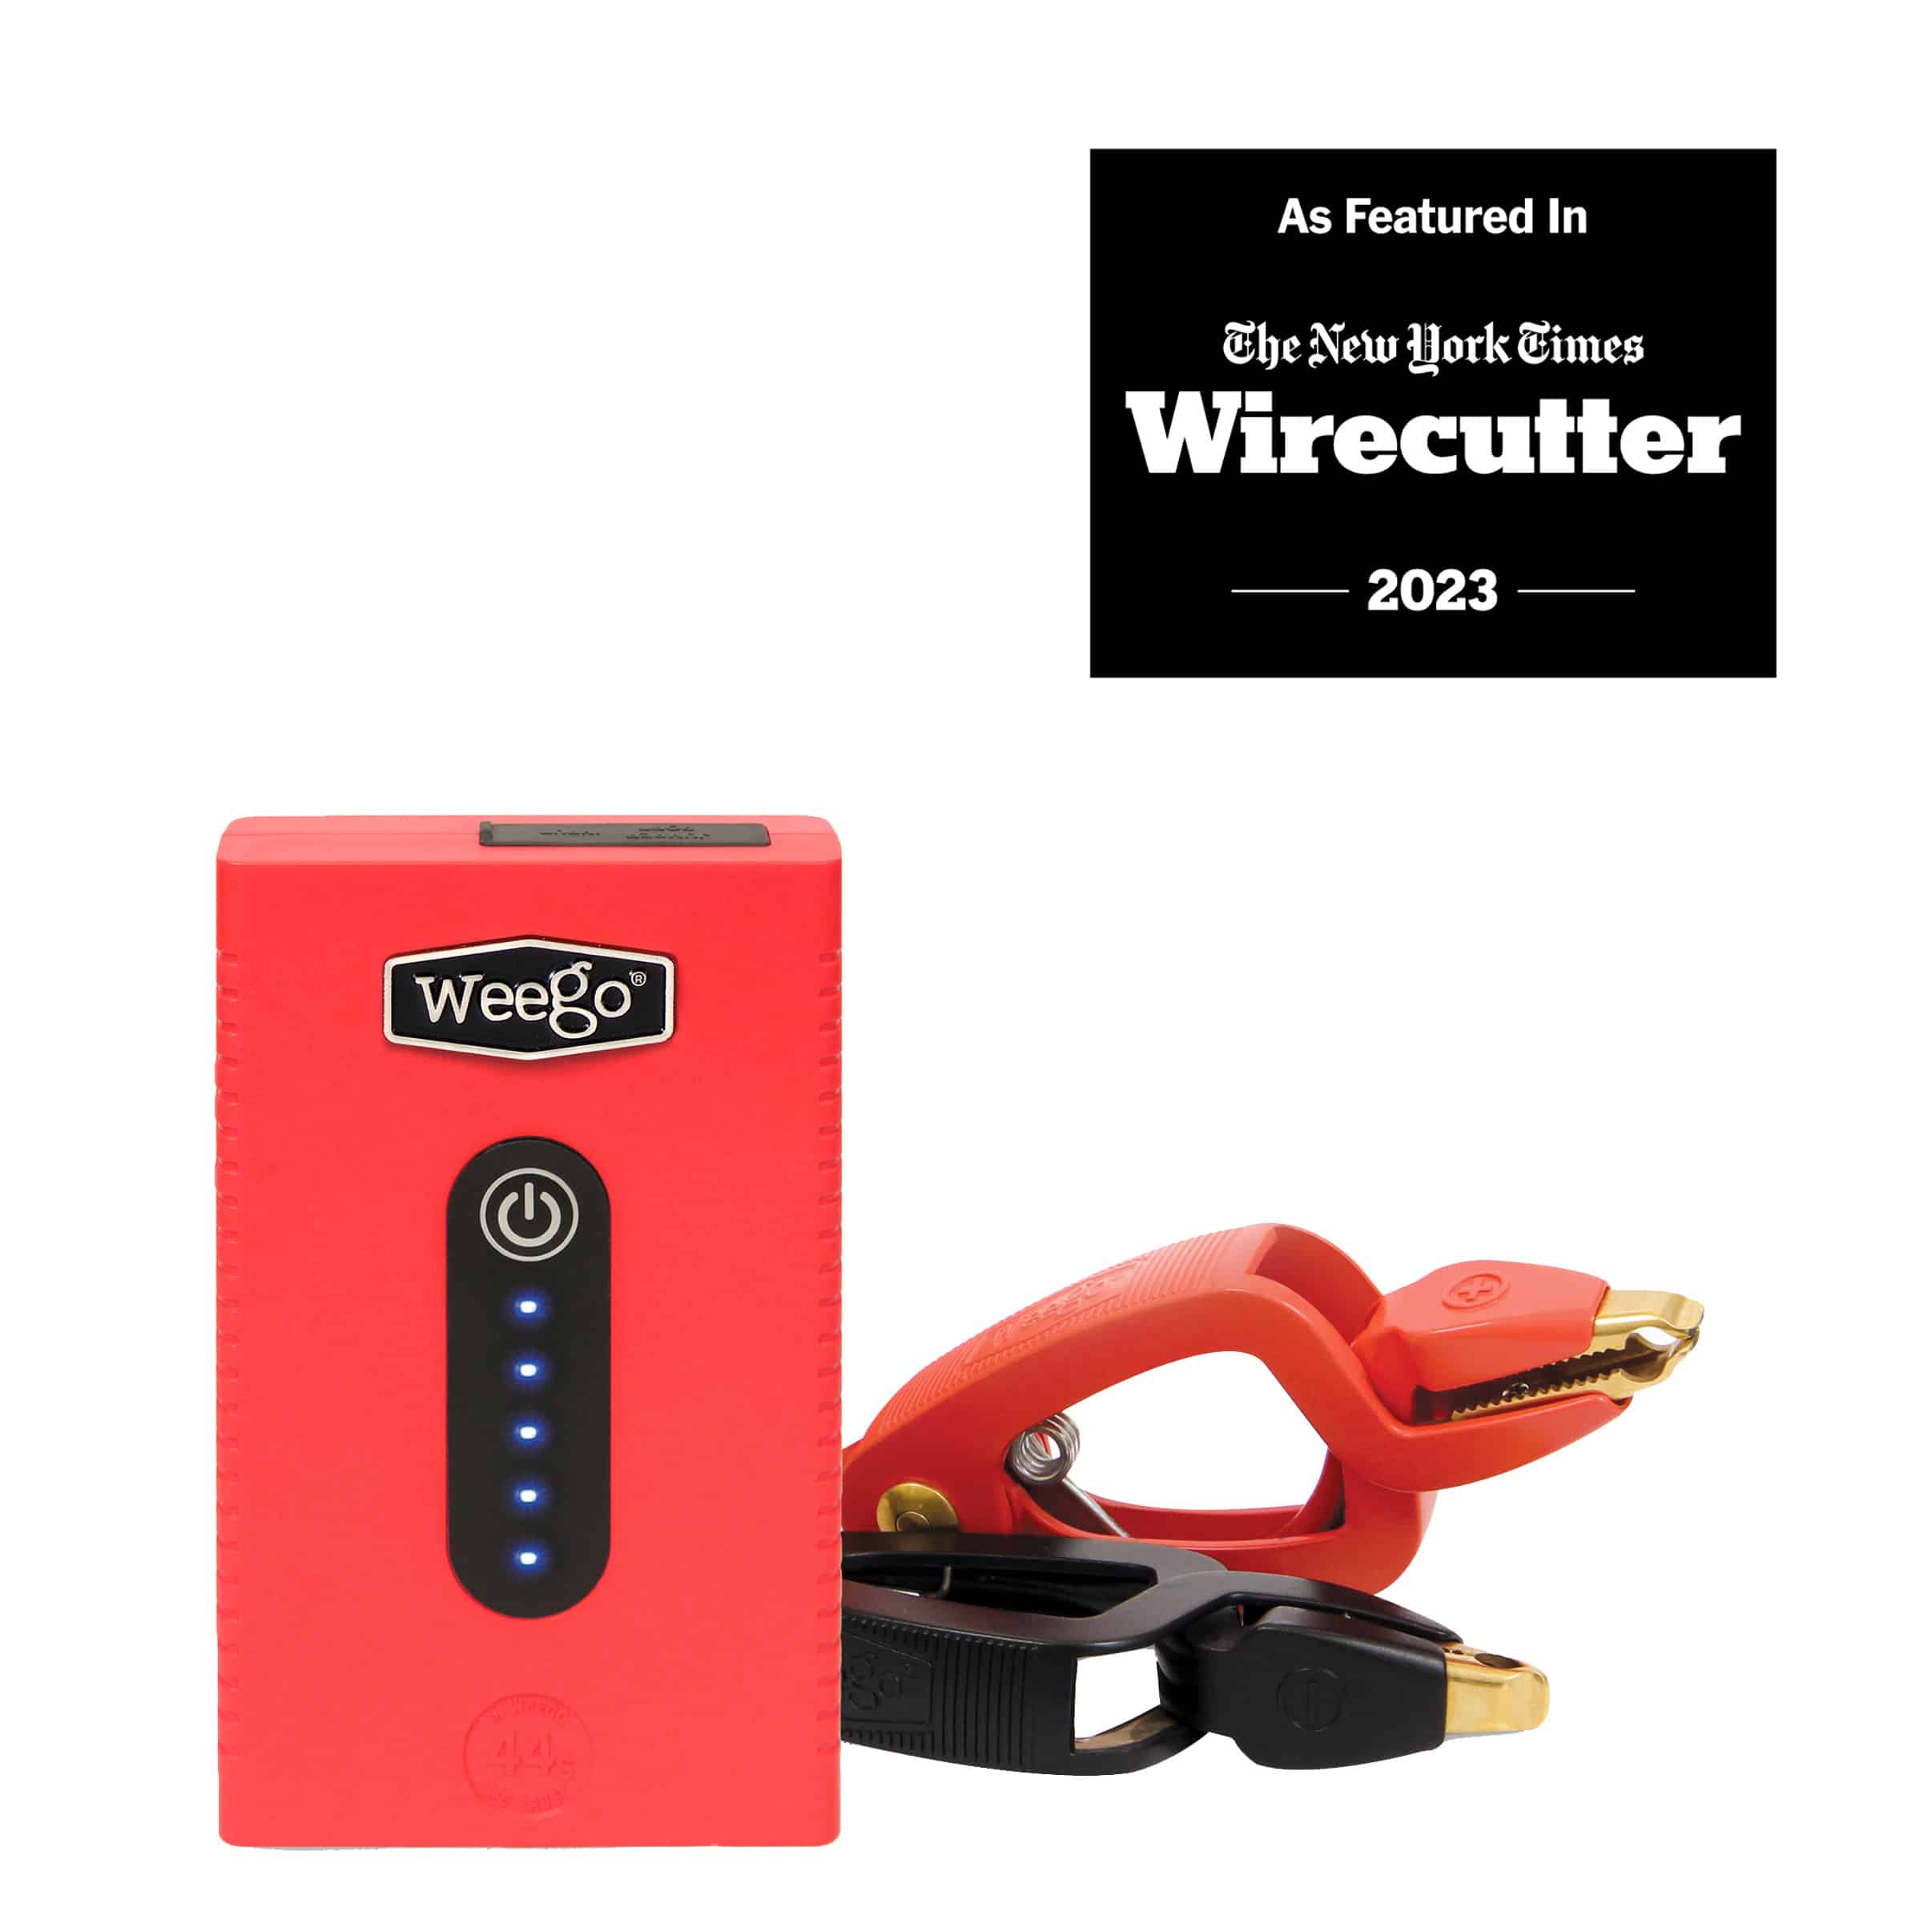 https://myweego.com/wp-content/uploads/2021/01/44s-with-Wirecutter-jpg.jpg